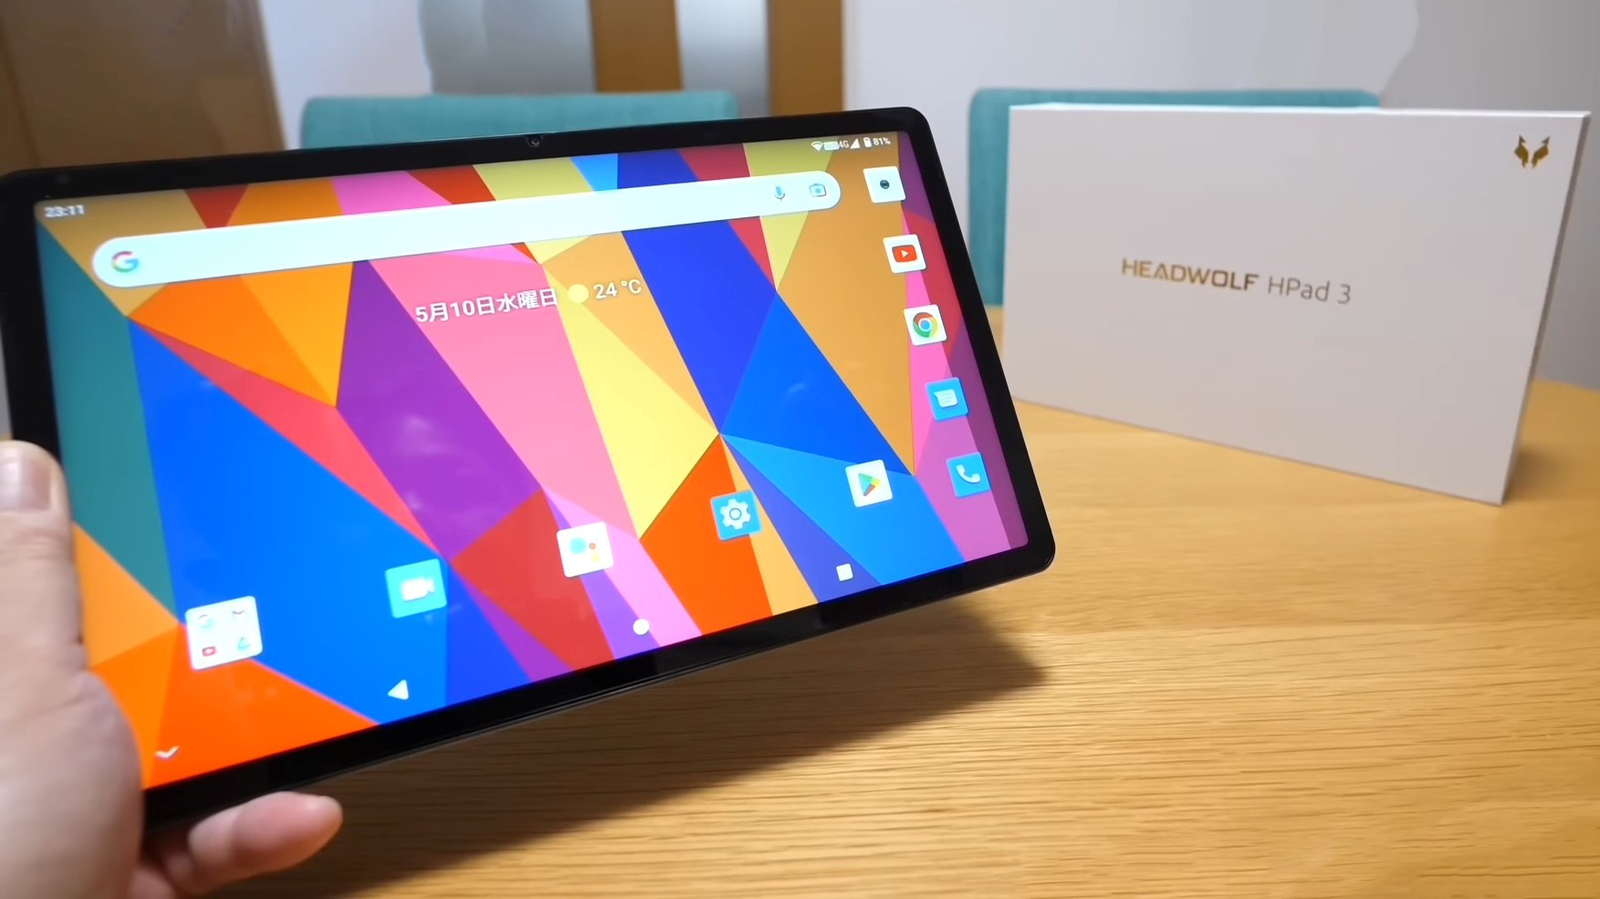 Headwolf HPad 3 Ultra: A Feature-Packed Android 12 Tablet - GadgetVue